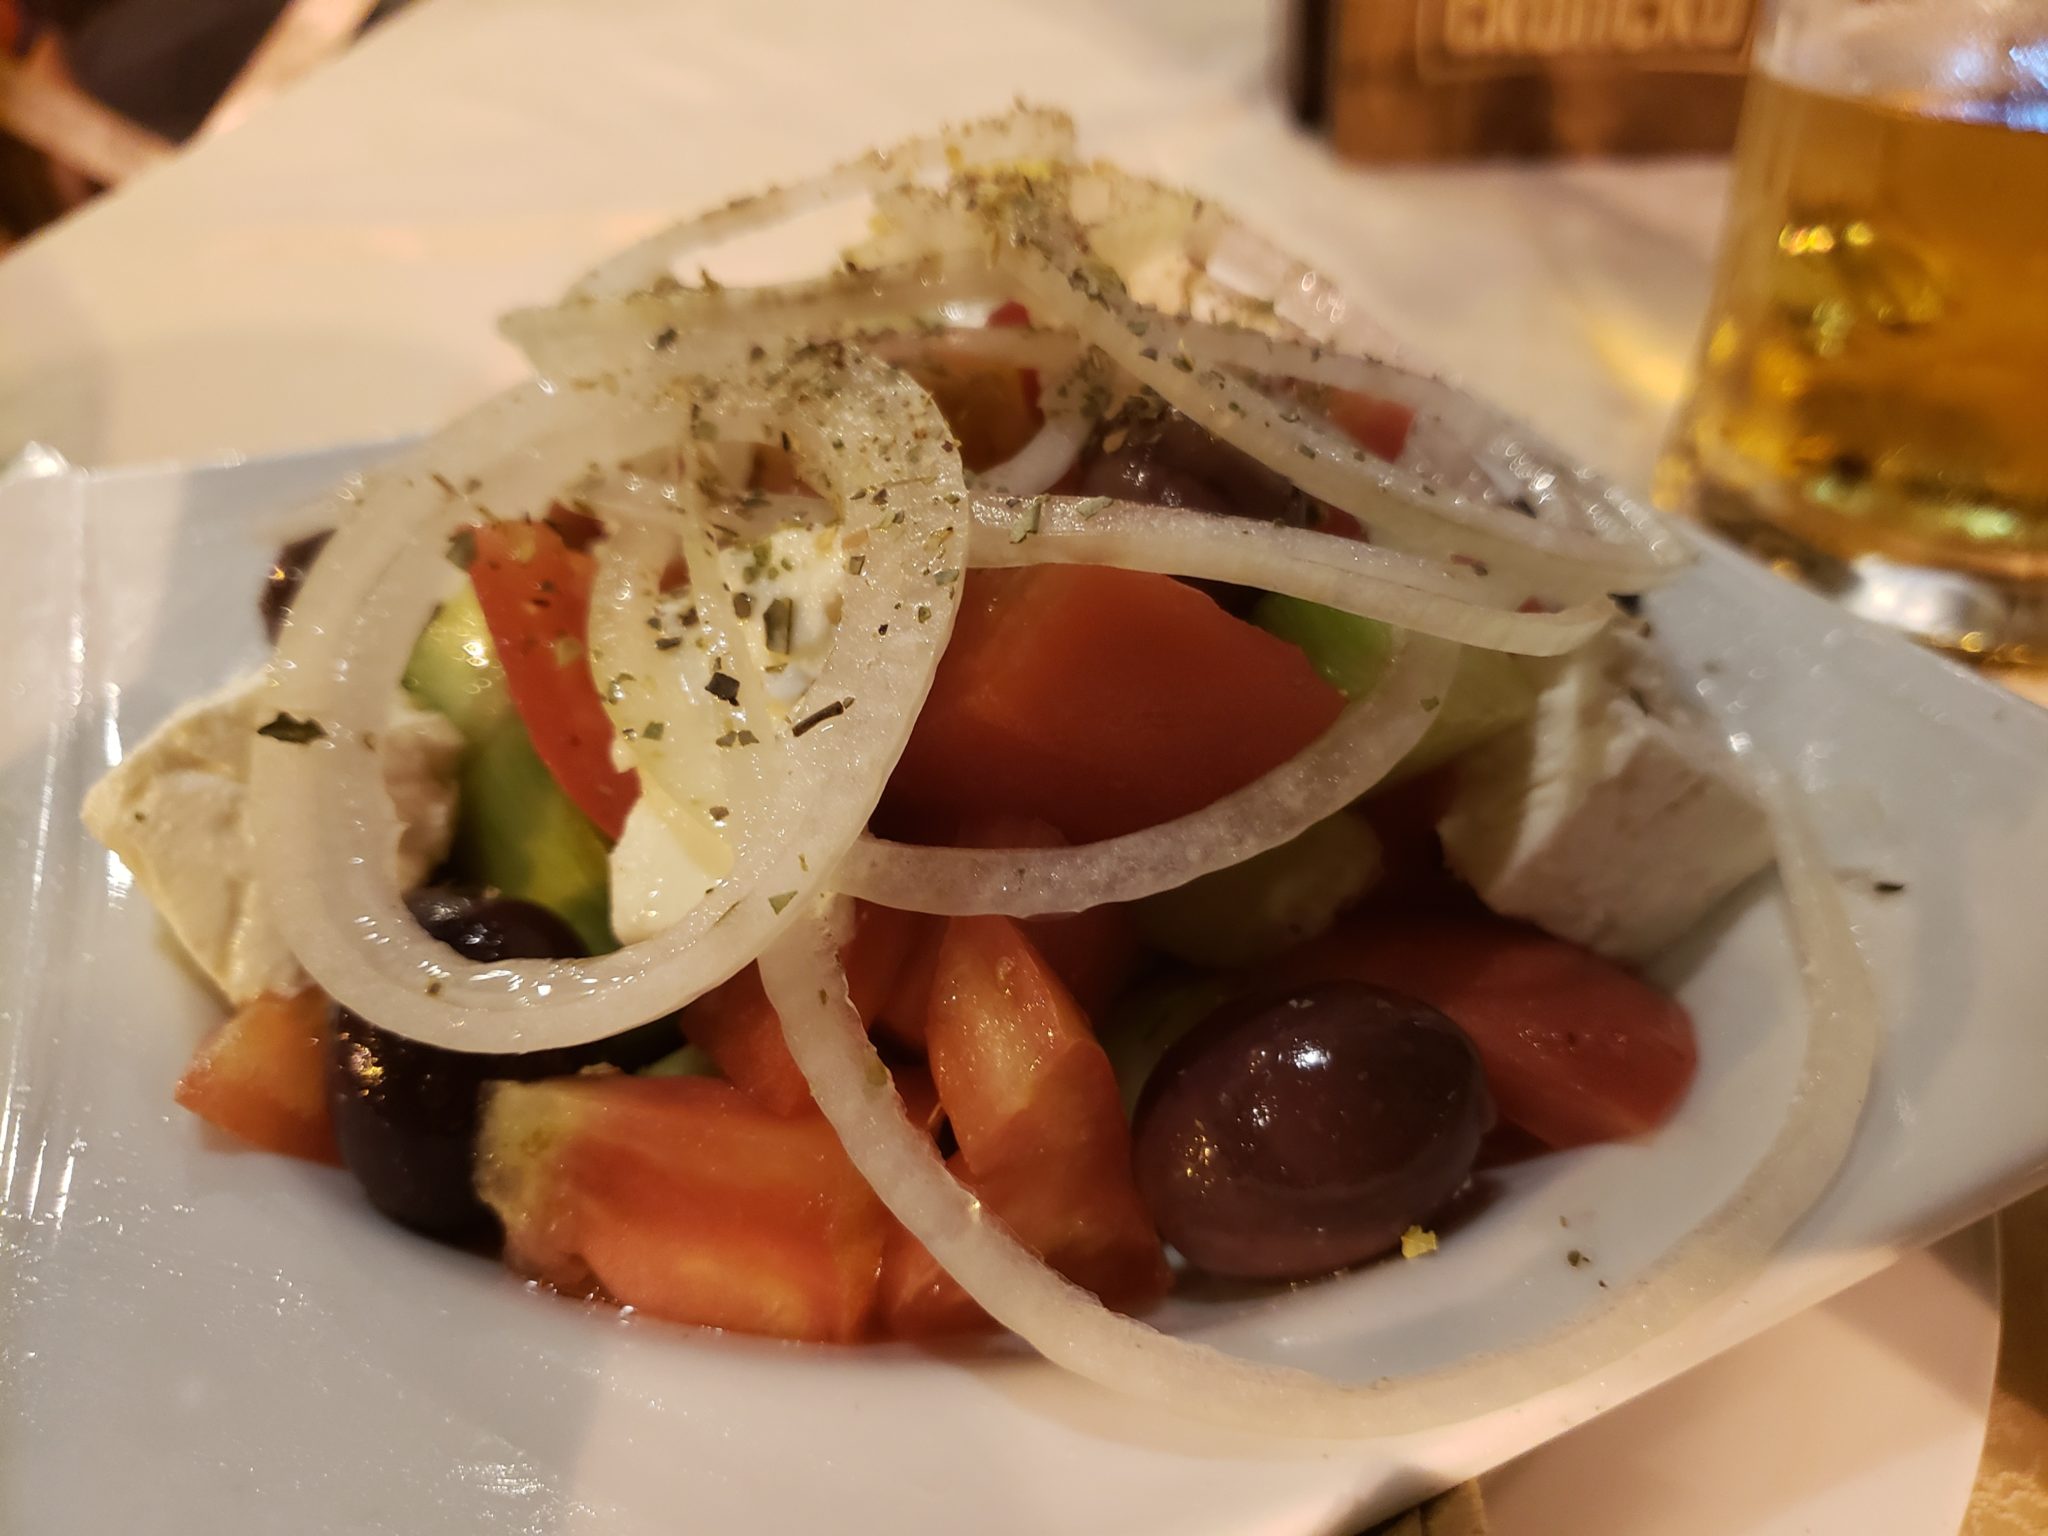 a plate of salad with onions and olives